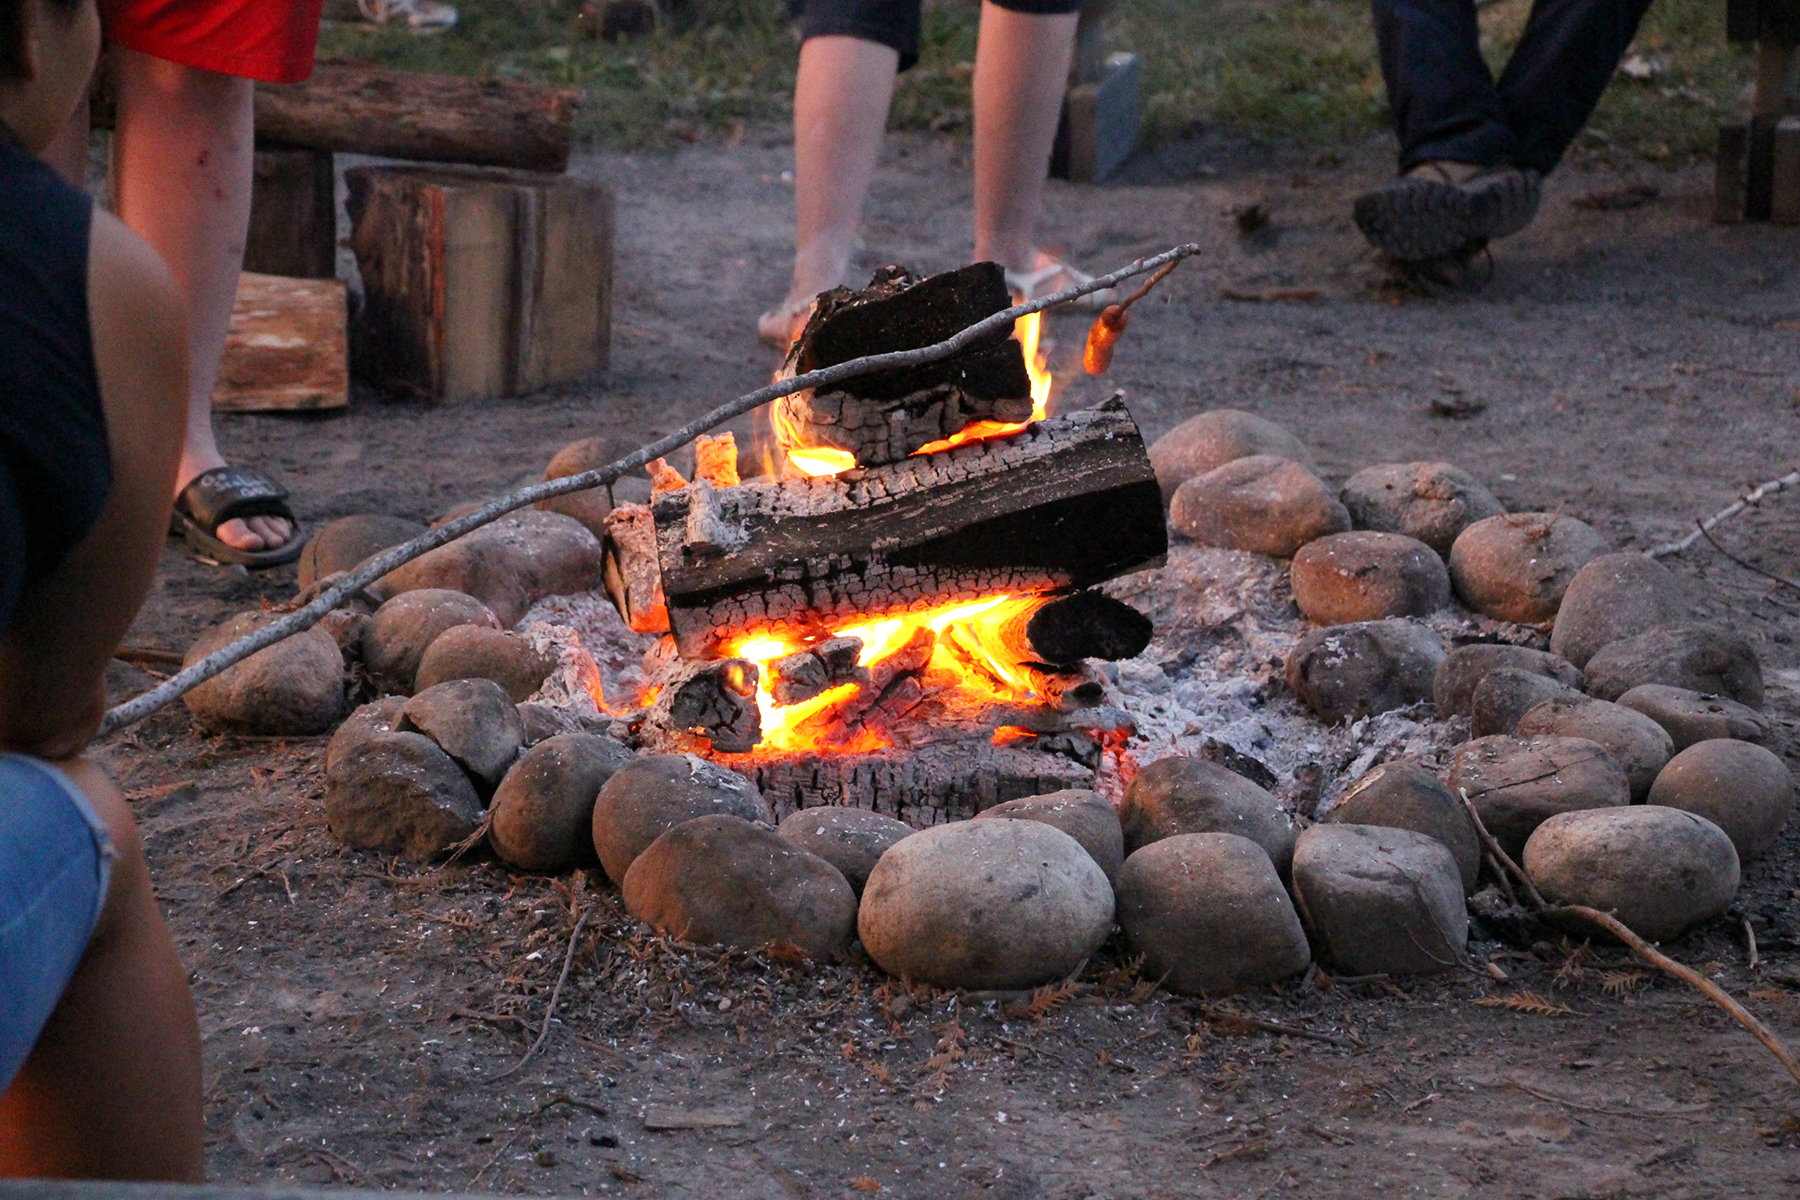 Image of a campfire